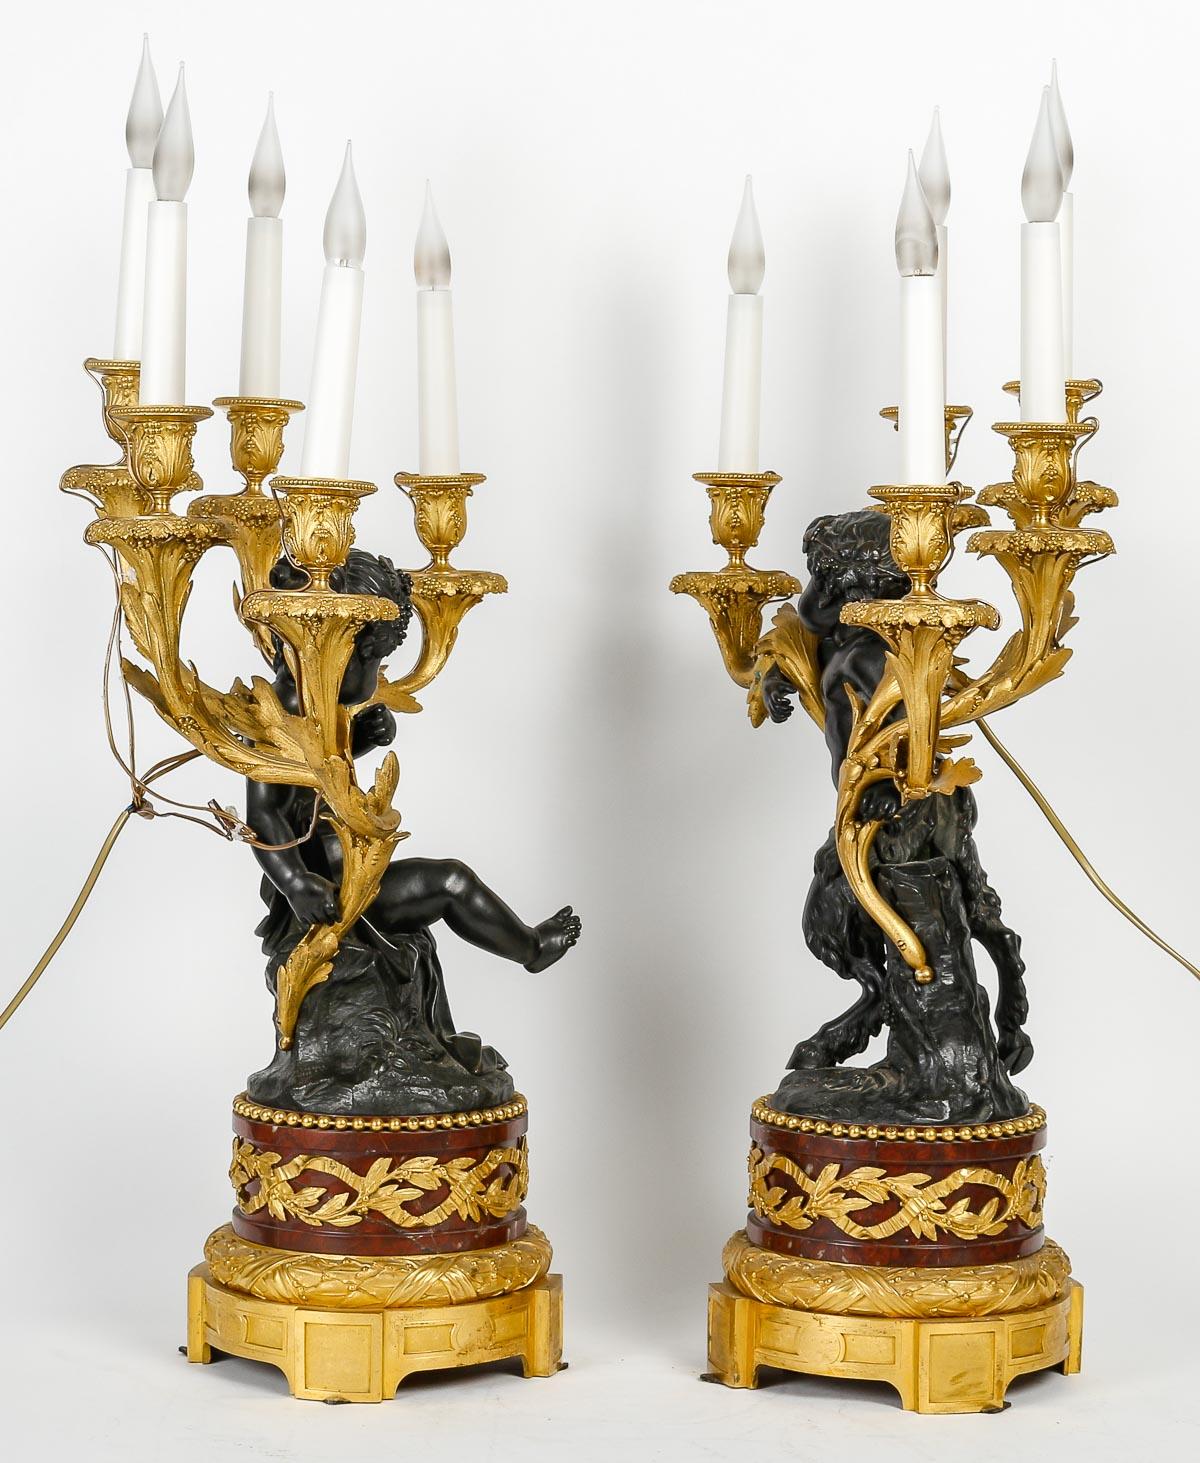 Pair of candelabra signed by Beurdeley, 19th century, Napoleon III period, 5-light candelabra in gilt bronze, patinated bronze and Griotte marble.
H: 72cm, l: 42cm, p: 20cm